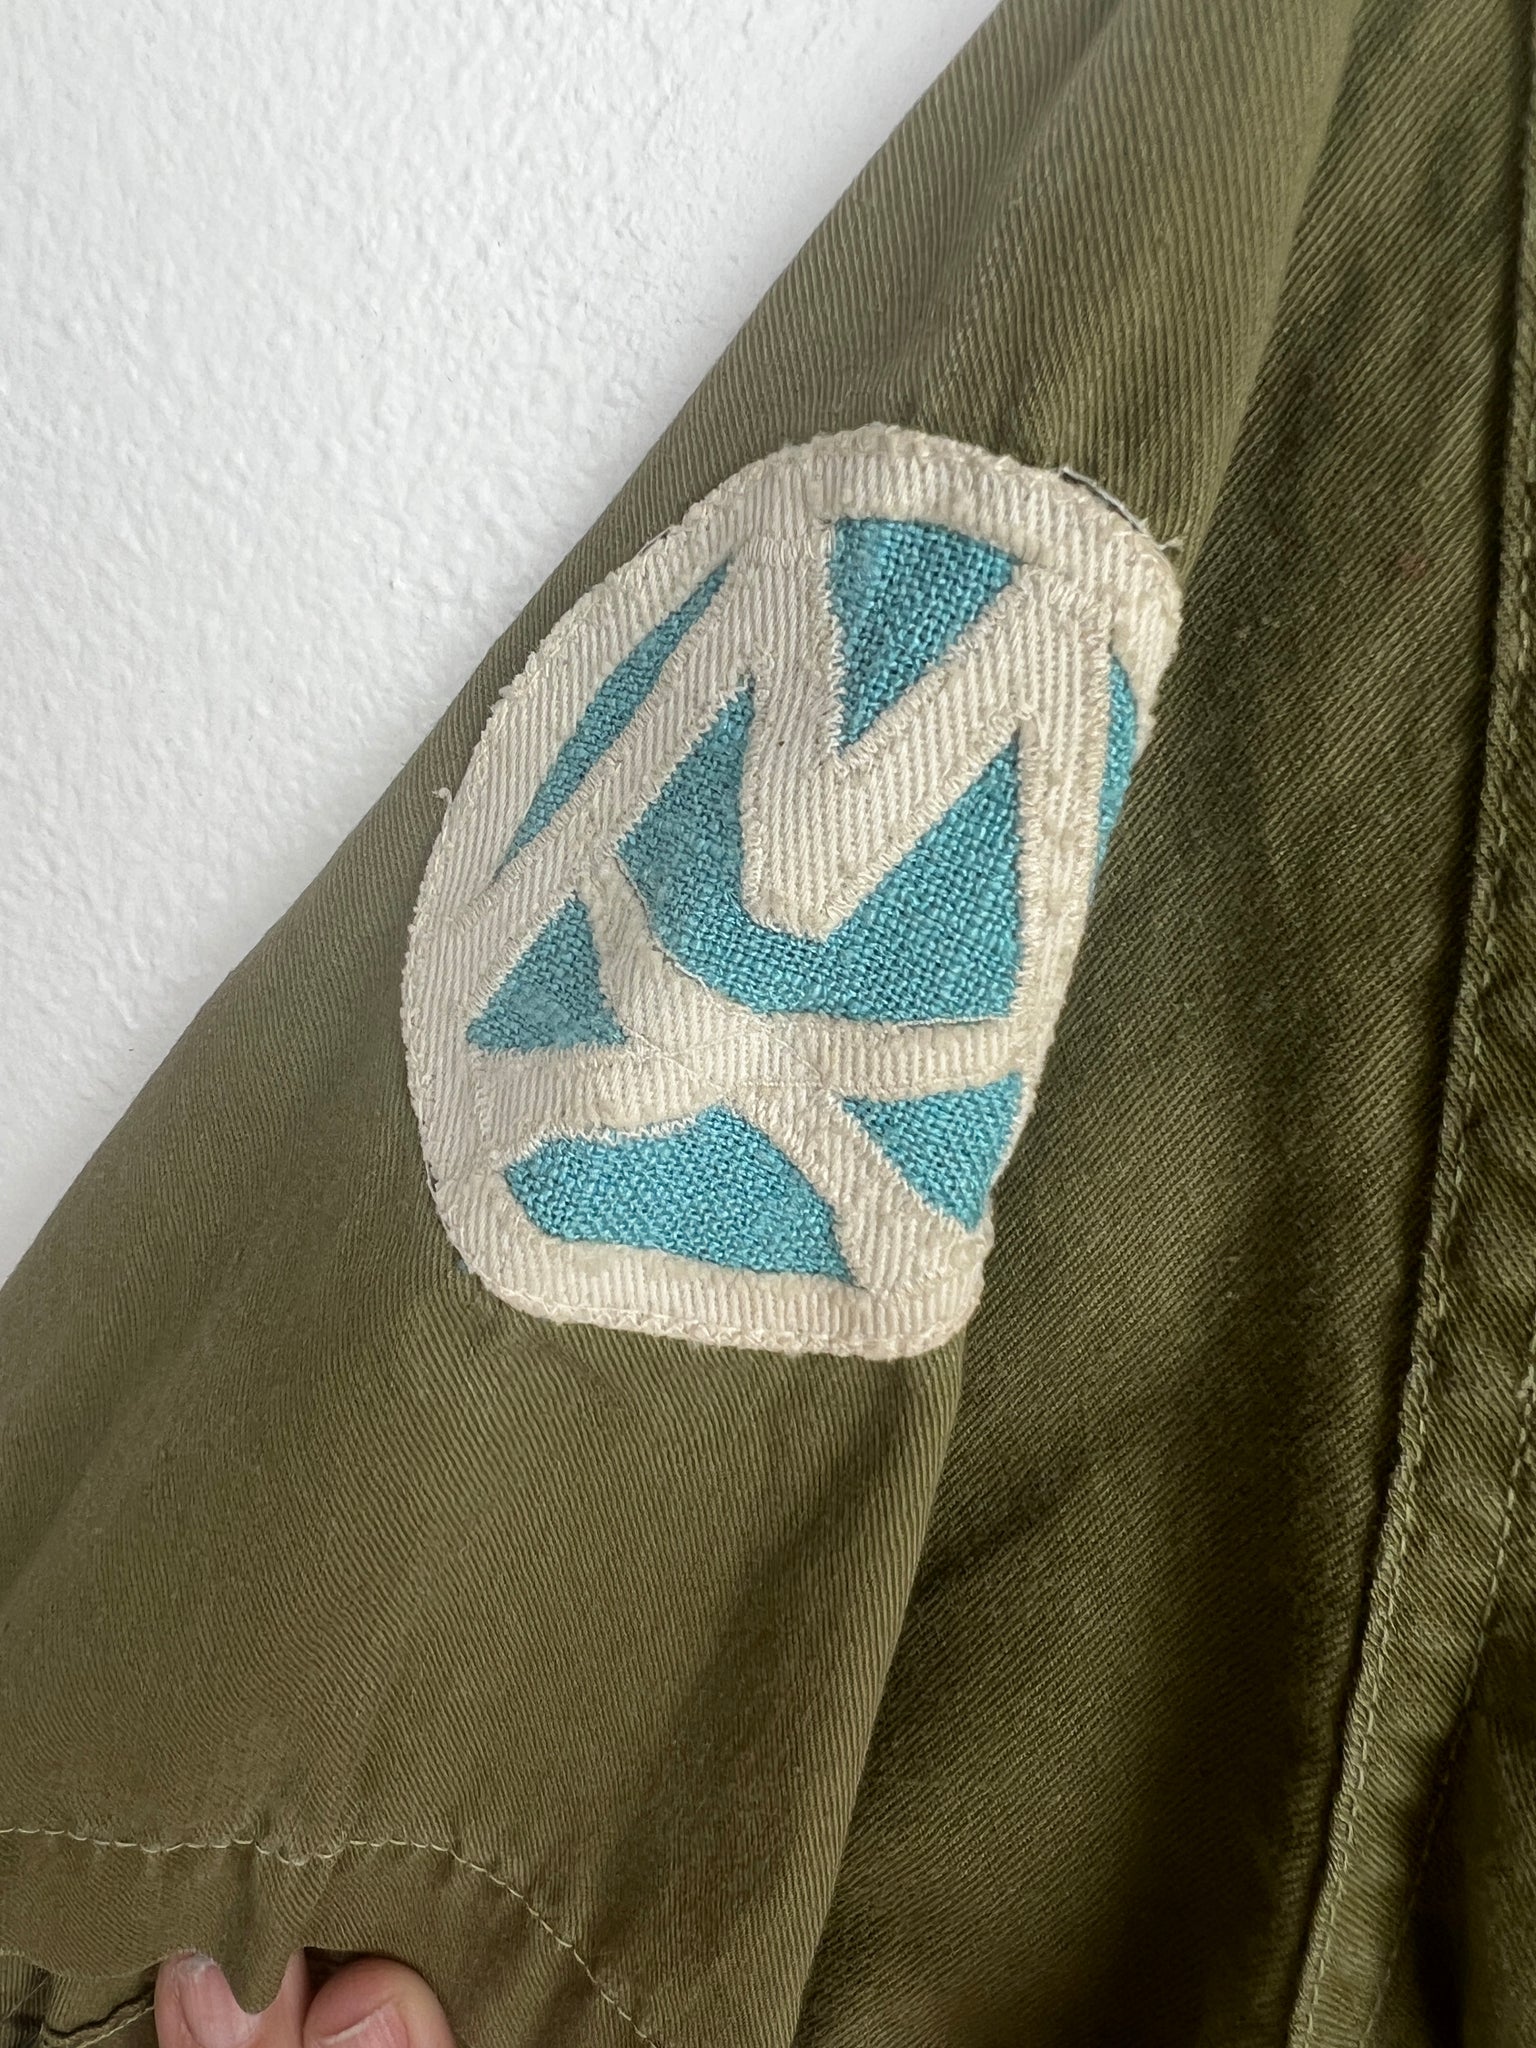 1950s COSTUME- boy scout shirt w/ patches